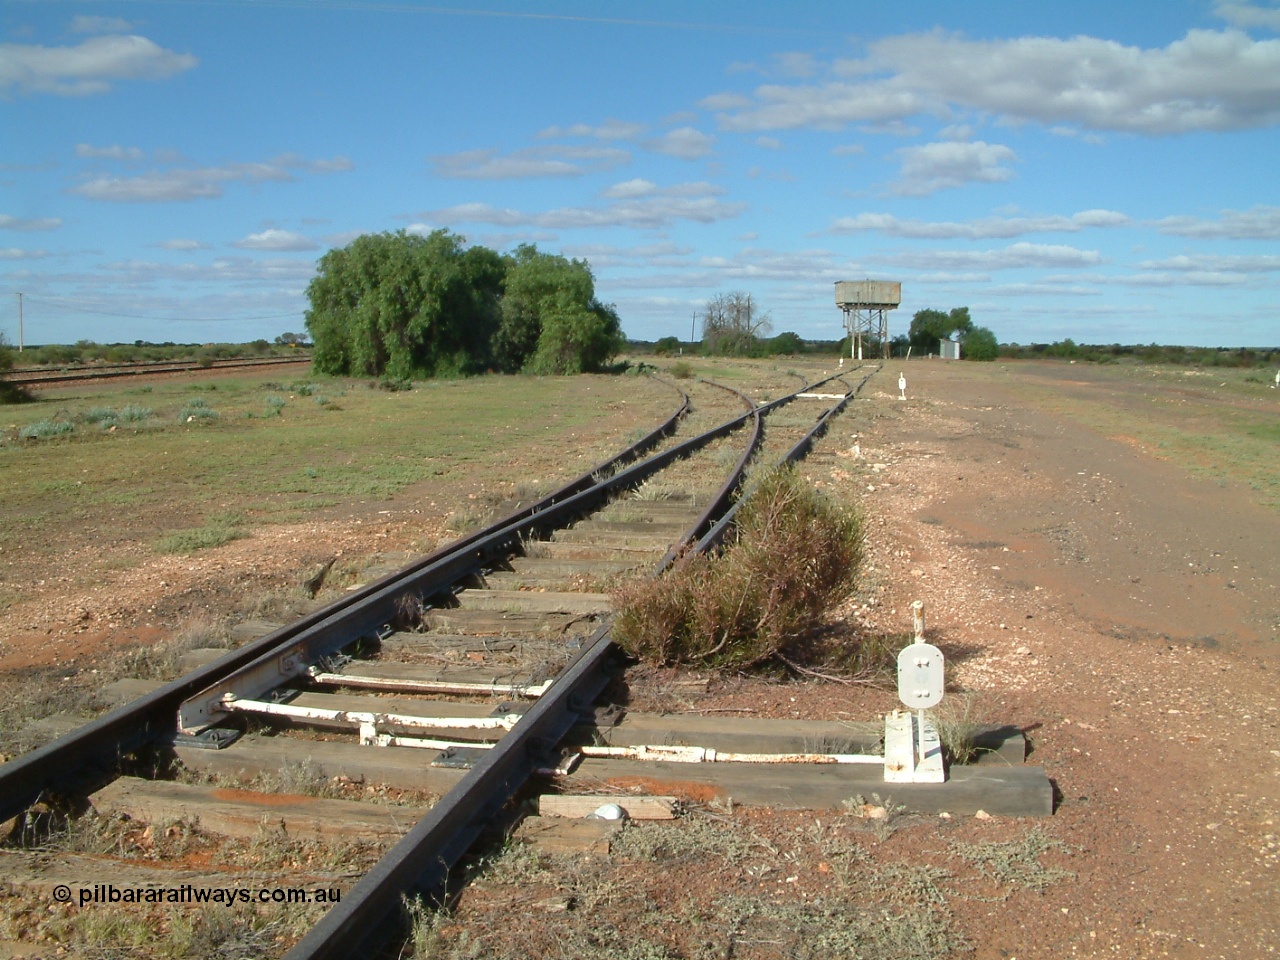 030415 154708
Tarcoola, at the 504.5 km, looking south east along the No. 1 Water Road, first set of points is the Camp Train Road, then the two Loco Roads No. 1 and No. 2. [url=https://goo.gl/maps/hBMd6tPiCPjG64URA]GeoData location[/url]. 15th April 2003.
